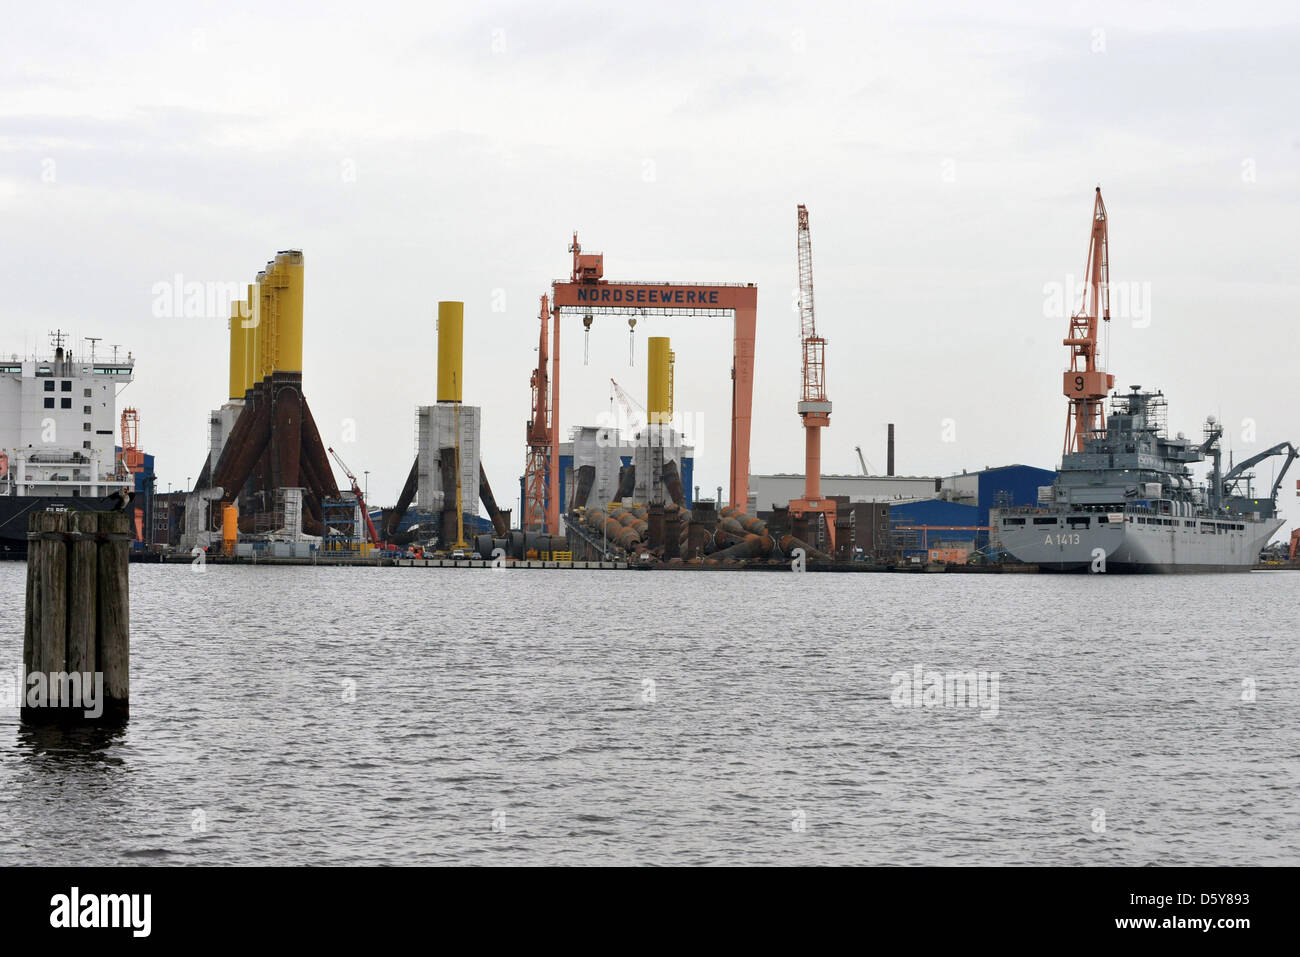 So-called tripods and two ships are pictured at the Siag Nordseewerke shipyard in Emden, Germany, 17 October 2012. These tripods are used as foundations for offshore wind turbines. The struggling offshore supplier with around 700 emplyees has filed for insolvency. The district court Aurich confirmed that such a request had been filed on 17 October 2012. Photo: CARMEN JASPERSEN Stock Photo